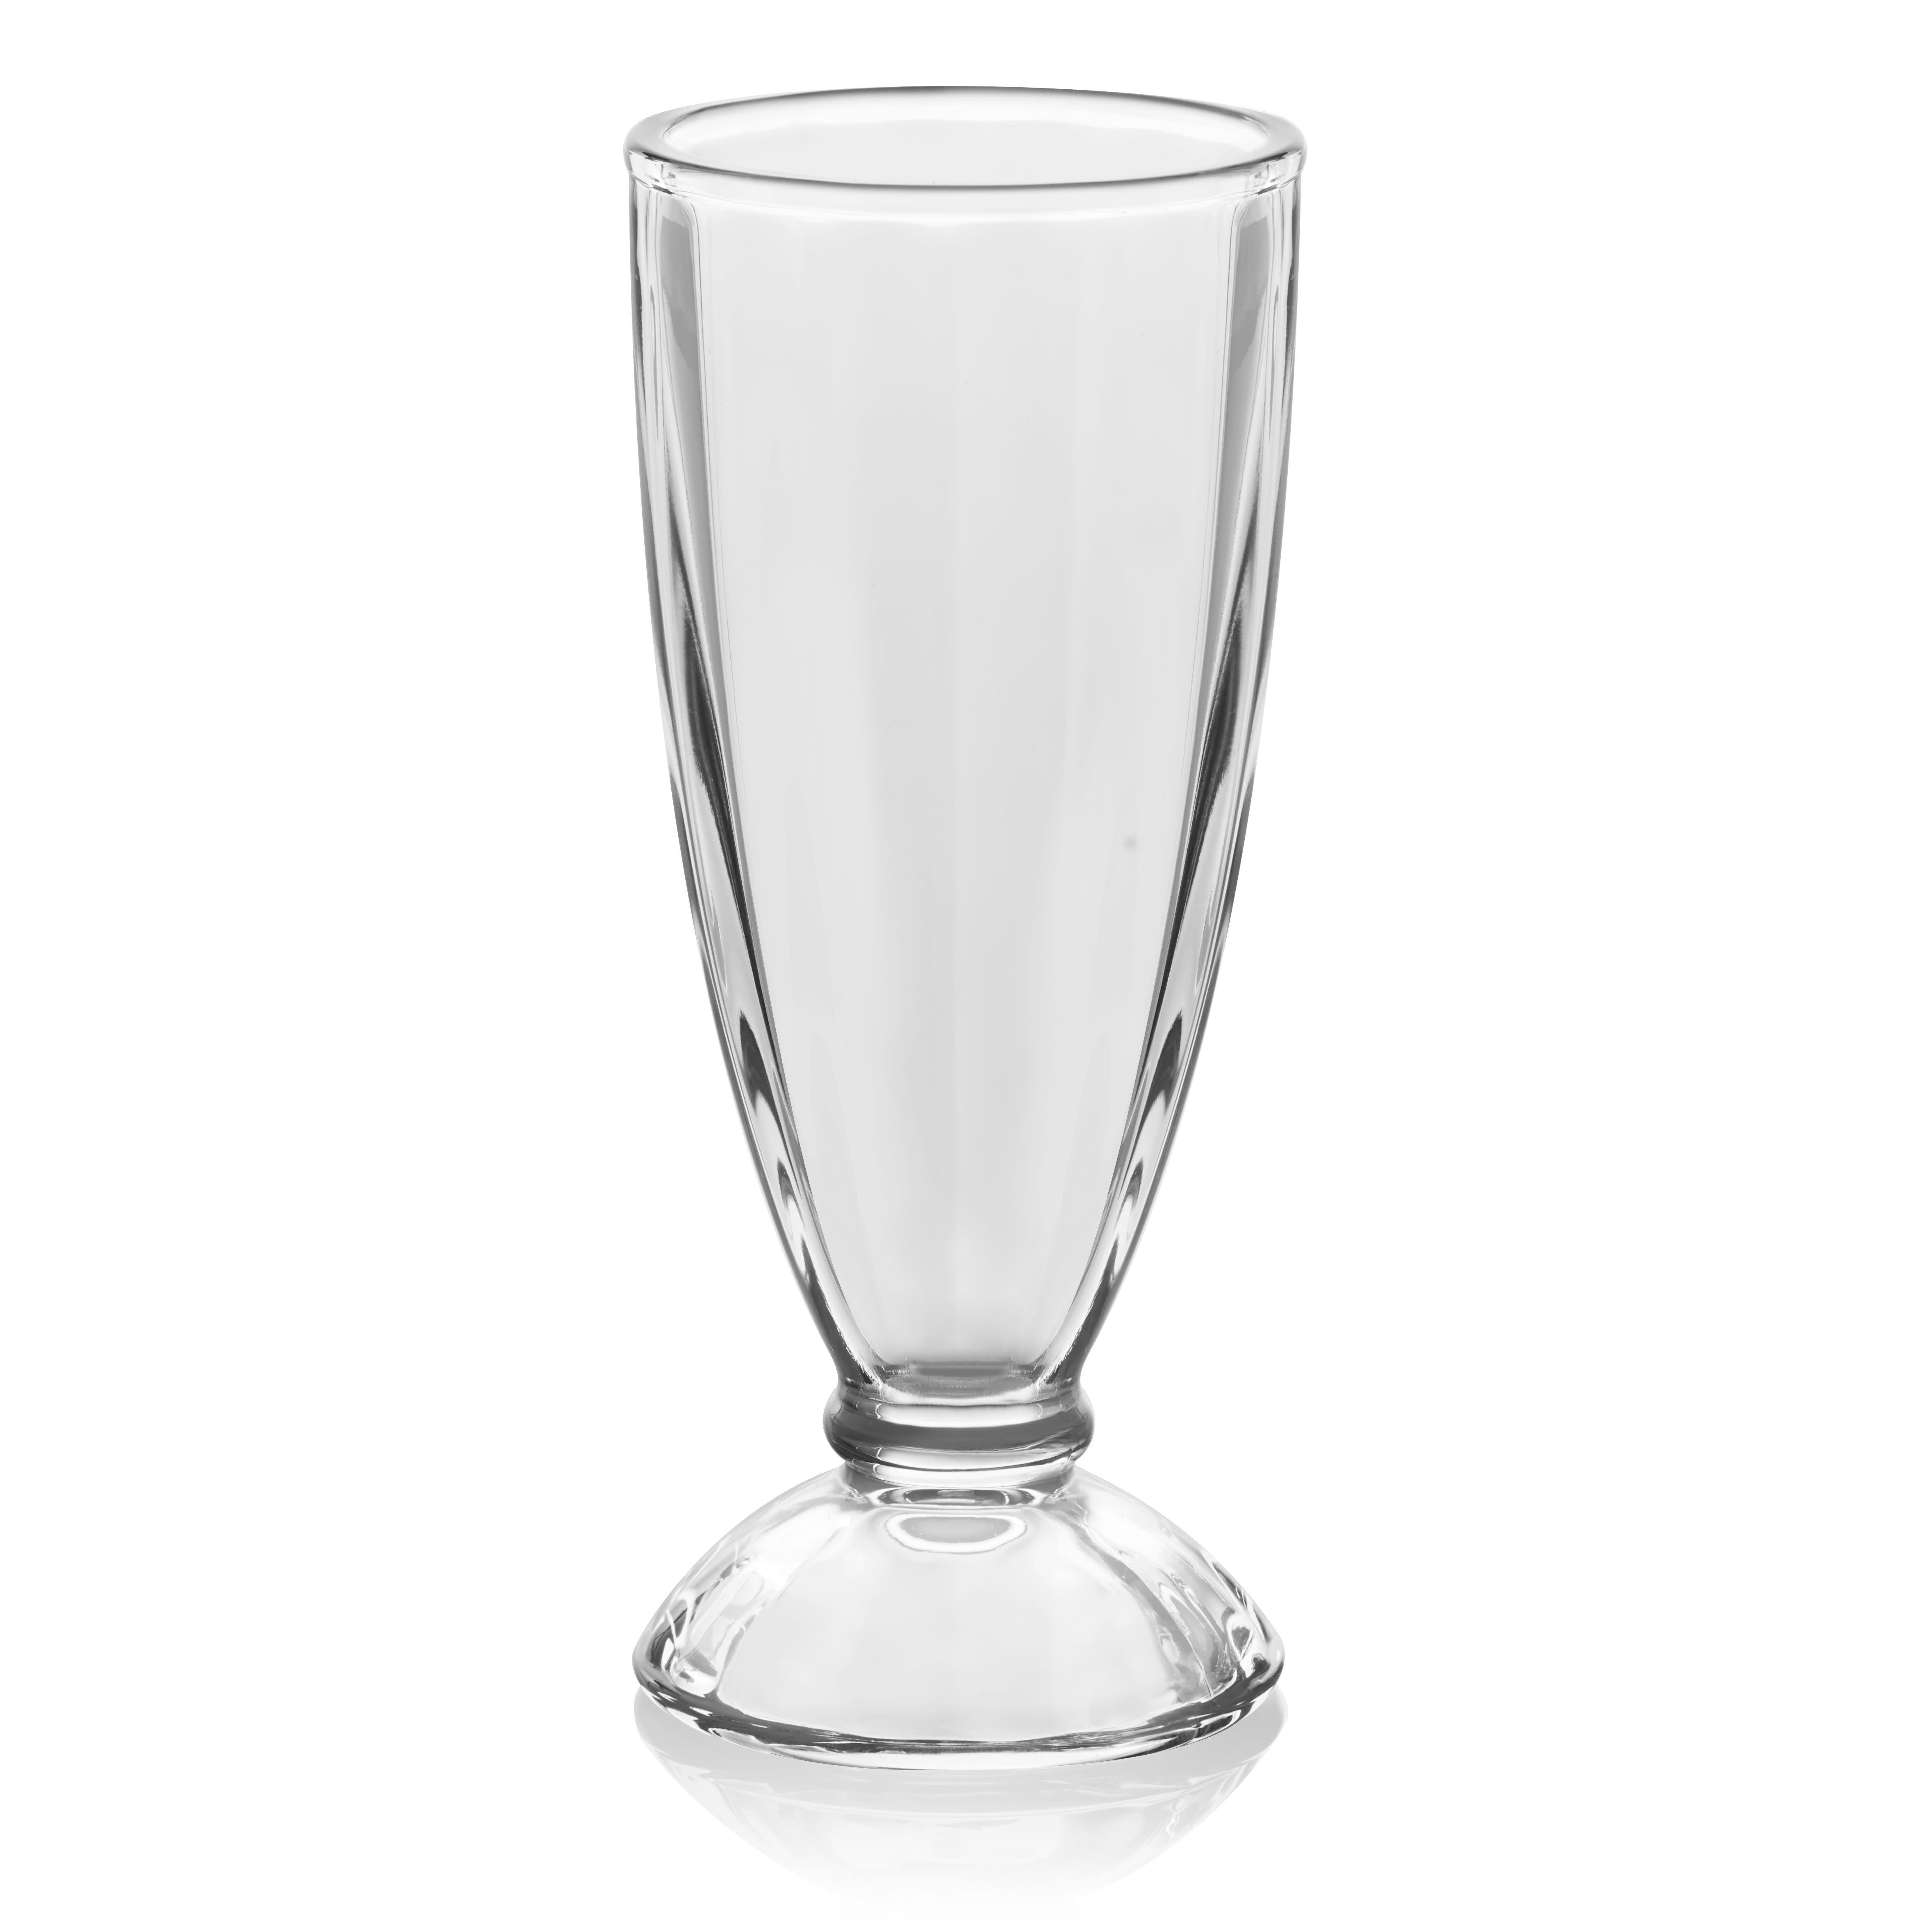 Olympia Contemporary Glass Cafetiere 12 Cup - GF233 - Buy Online at Nisbets